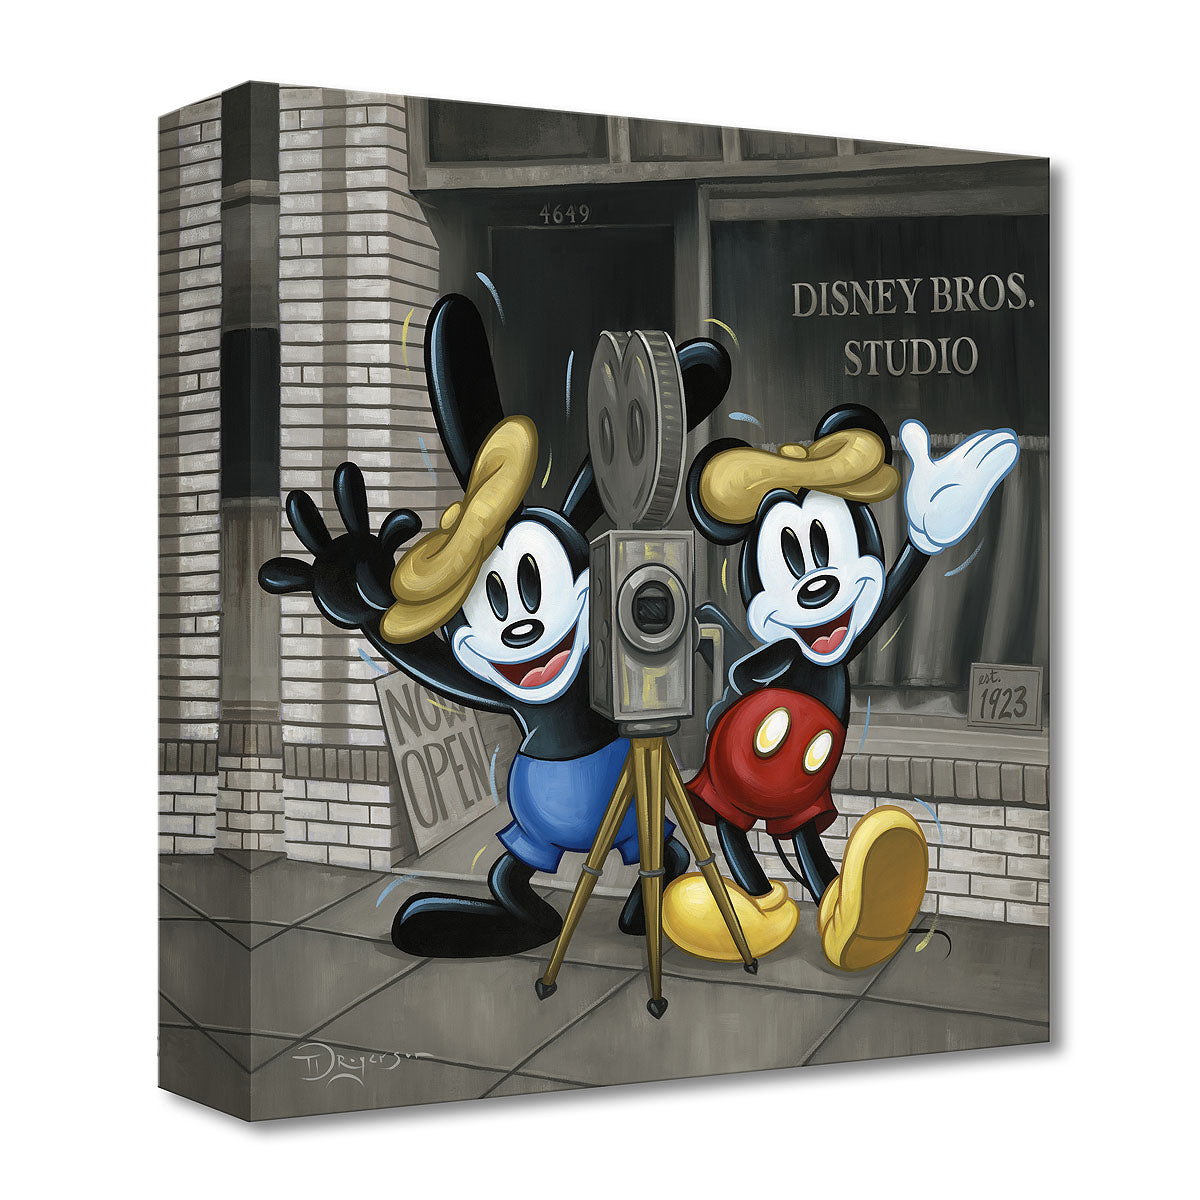 Bros in the Business - Disney Treasure on Canvas